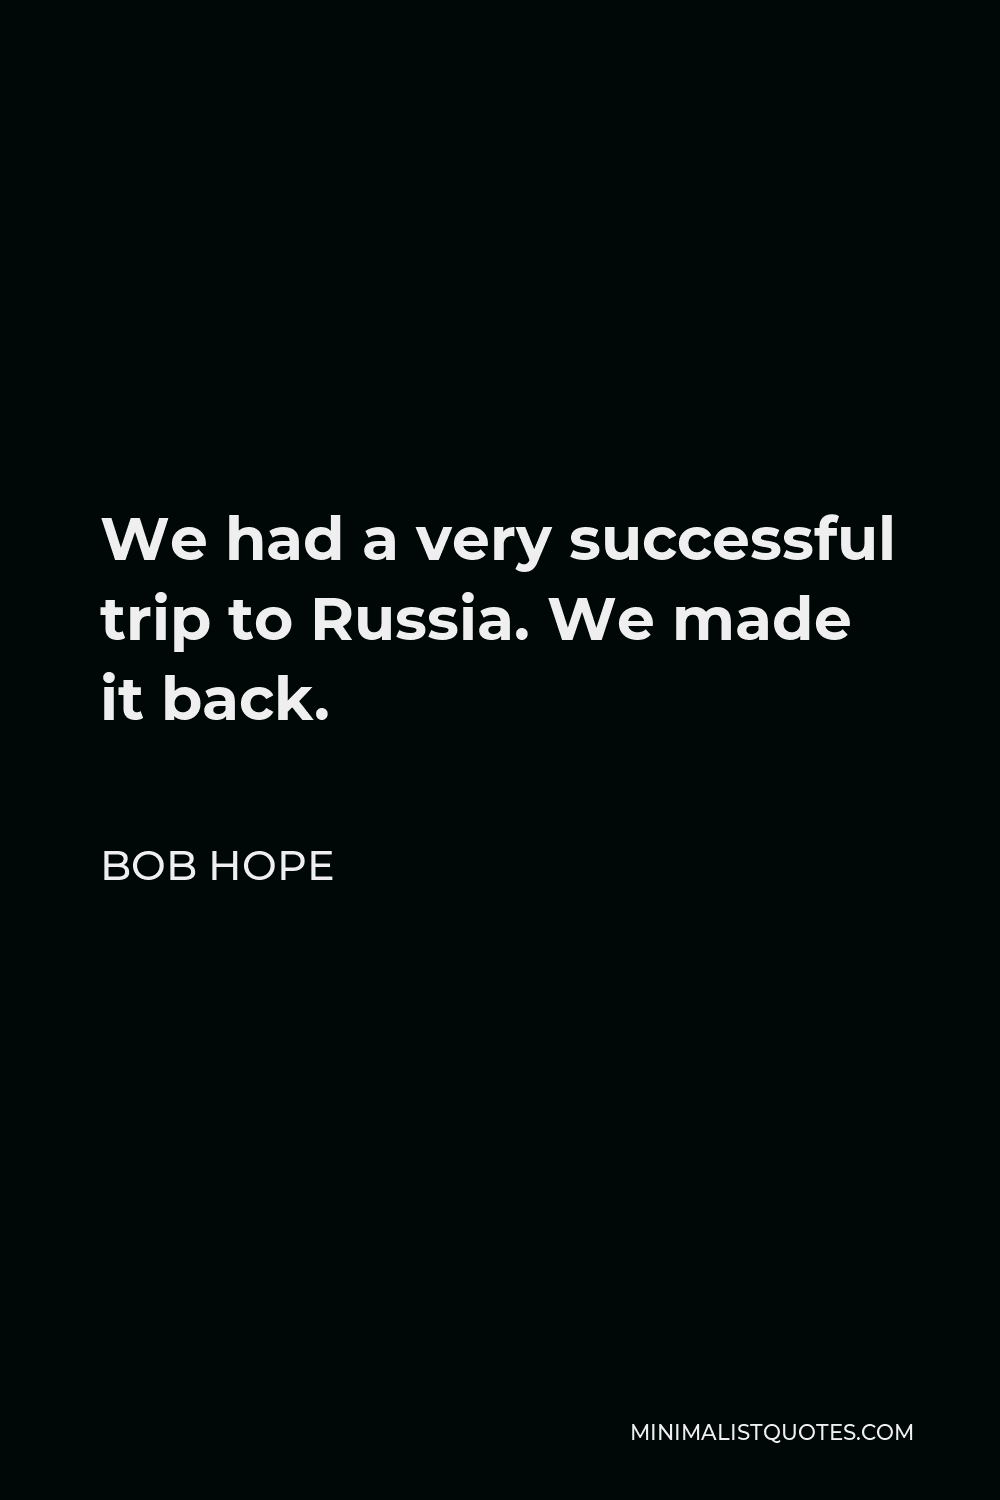 Bob Hope Quote - We had a very successful trip to Russia. We made it back.